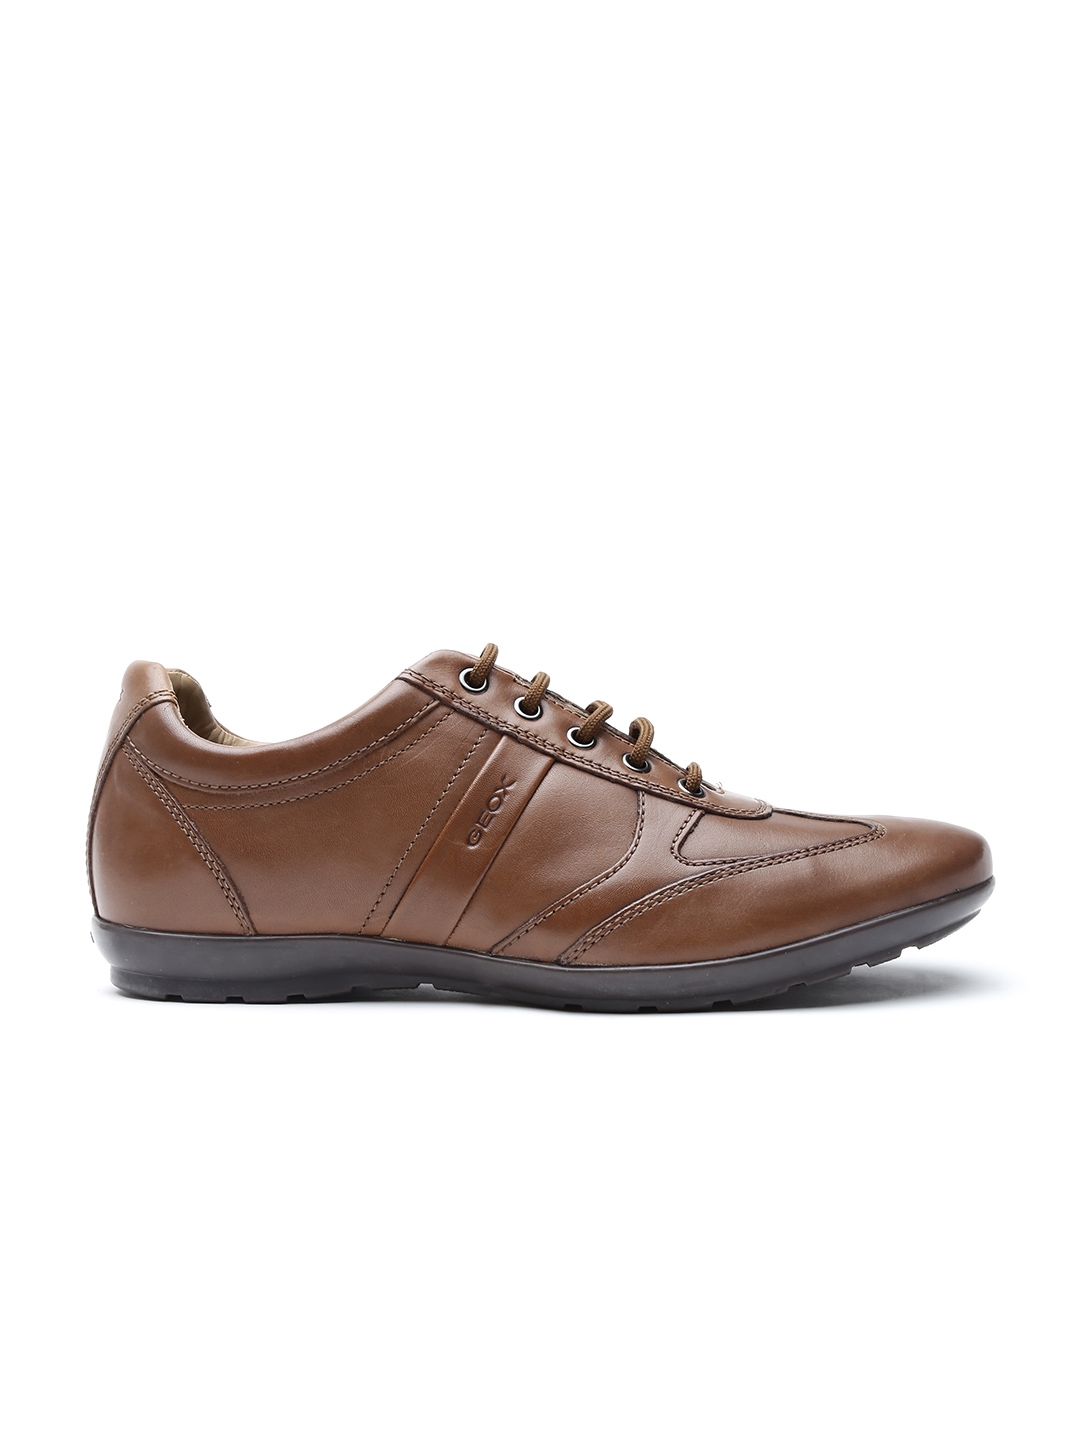 Buy GEOX Men Brown Italian Patent Leather Semiformal Shoes - Formal Shoes 1358031 | Myntra